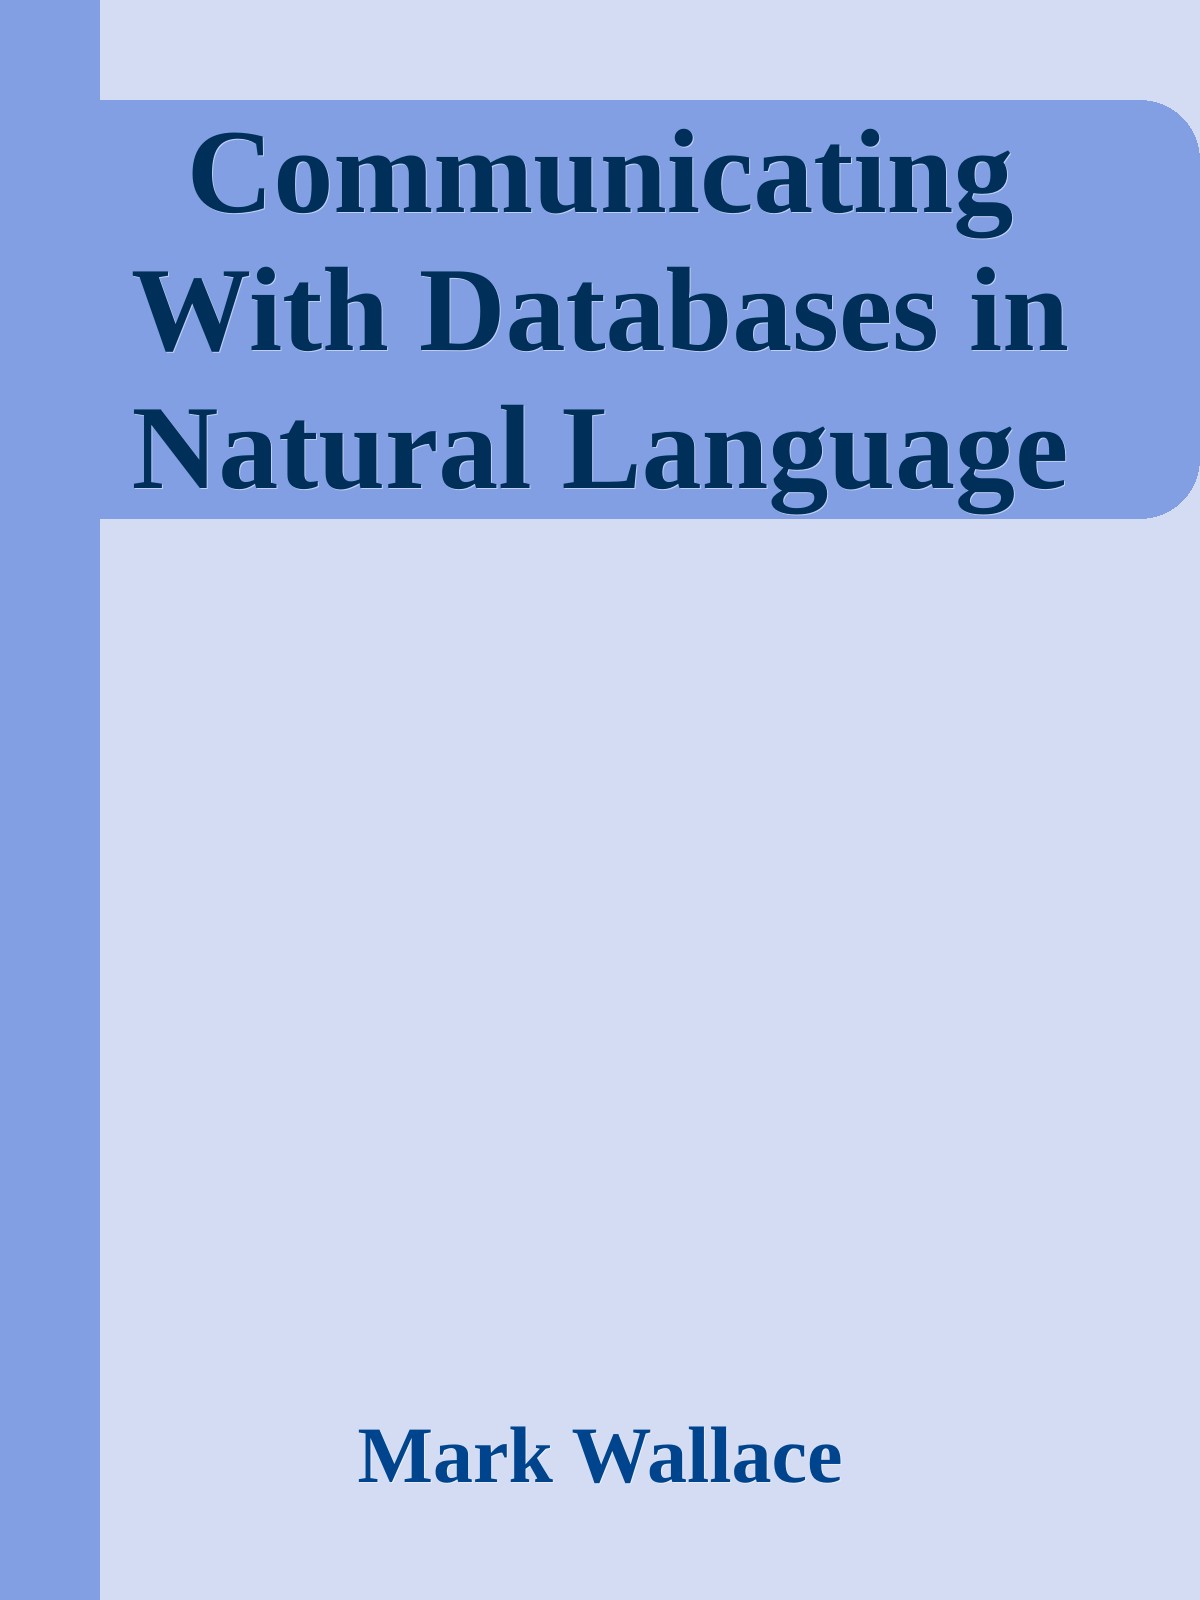 Communicating with Databases in Natural Language